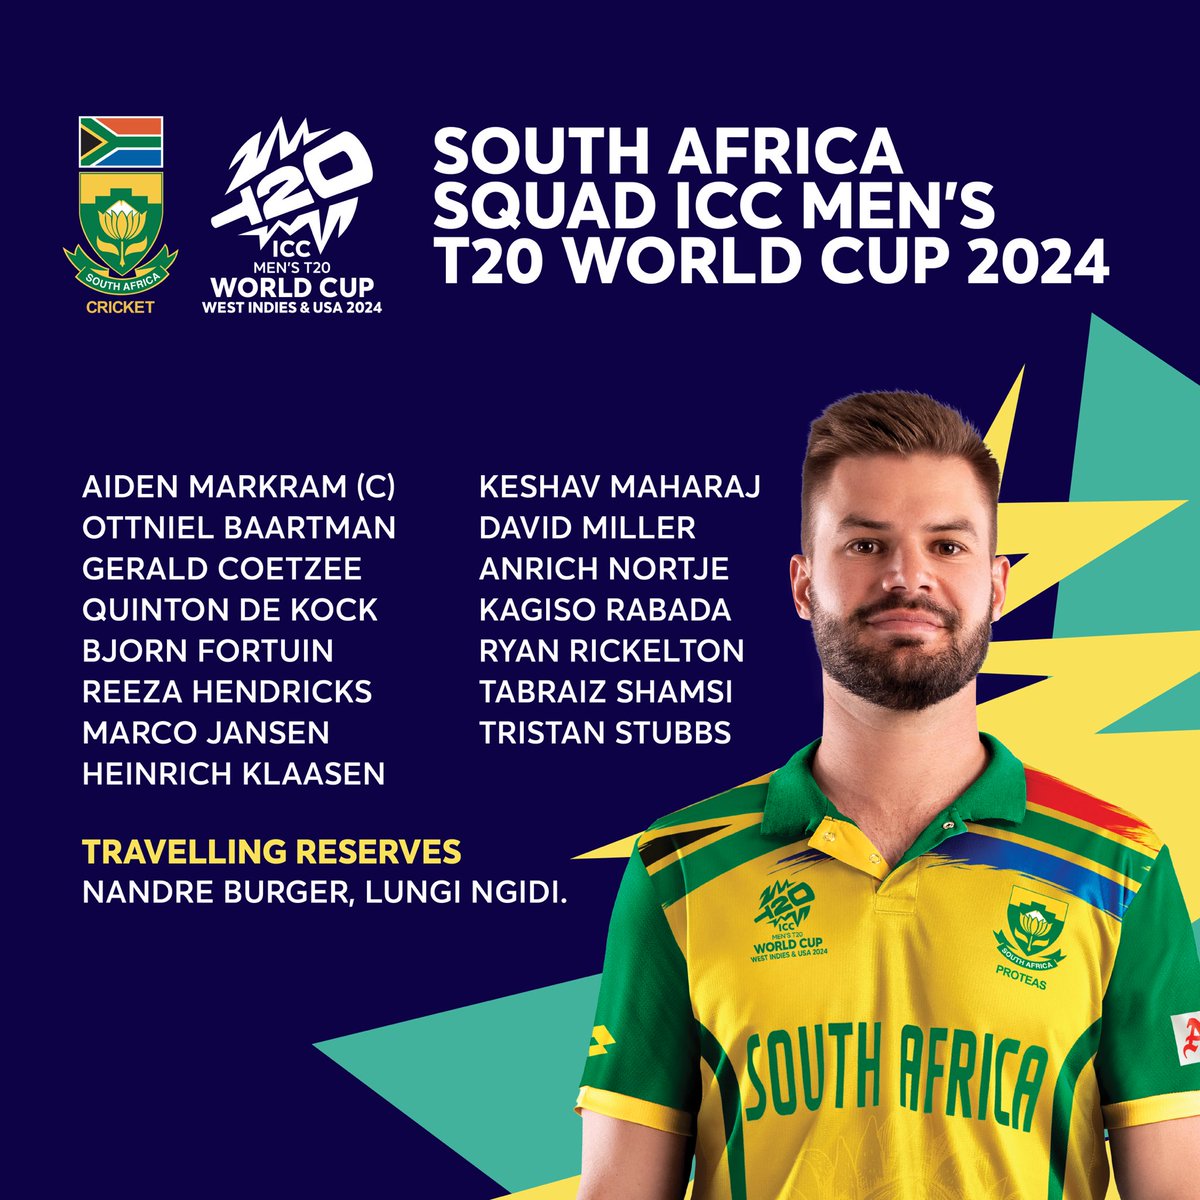 🚨𝙎𝙦𝙪𝙖𝙙 𝘼𝙣𝙣𝙤𝙪𝙣𝙘𝙚𝙢𝙚𝙣𝙩 🚨

Captain Aiden Anna Leading South African Team For T20 World Cup 2024 in West Indies & USA …!!!💥

Aiden Markram Won Back-To-Back @SA20_League Trophy.

All The Best @AidzMarkram And SouthAfrica Team 😻

#ProteasMen #T20WorldCup24